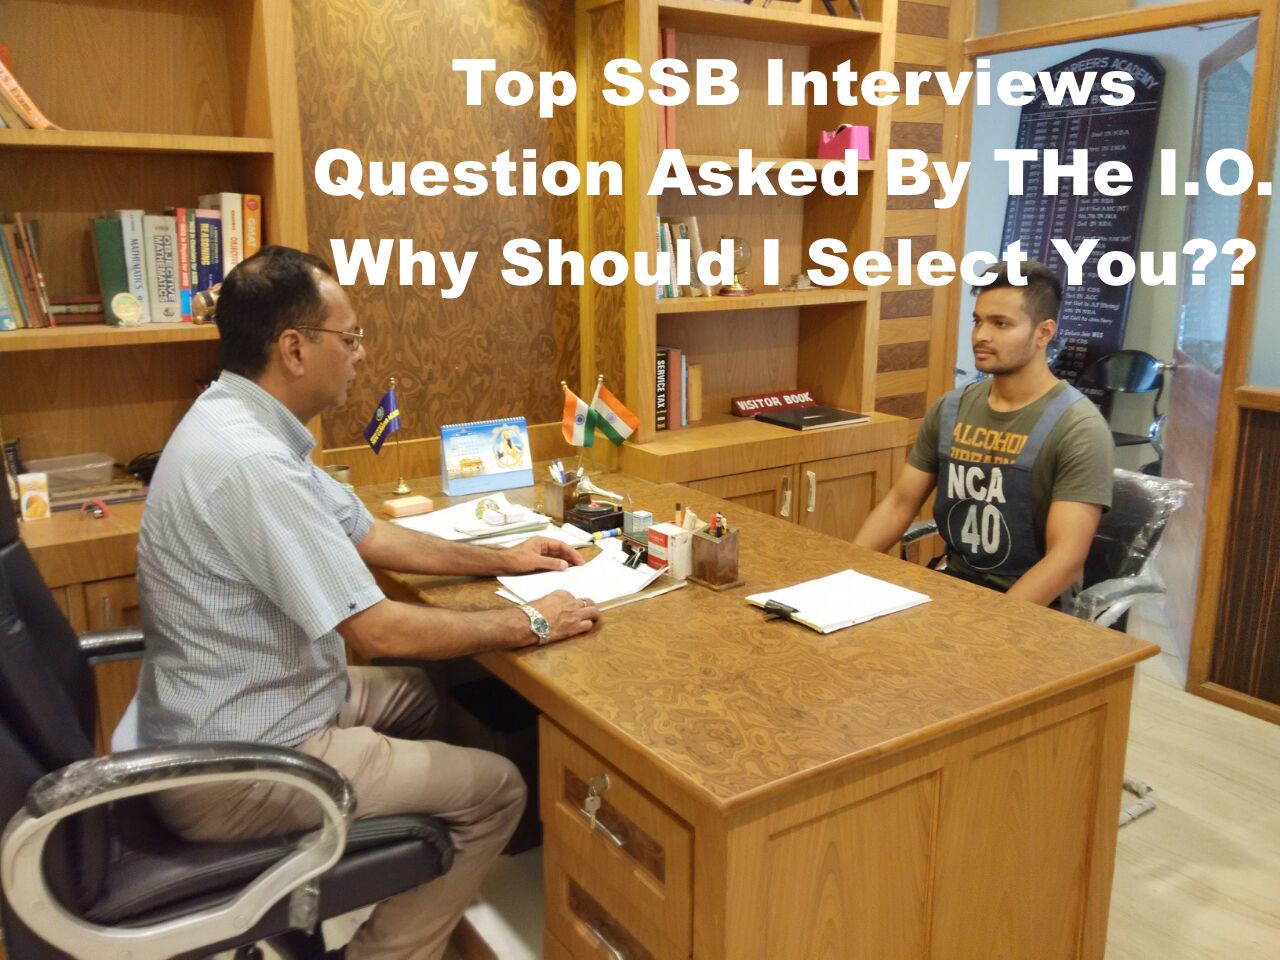 Top SSB Interview Question asked by I.O.